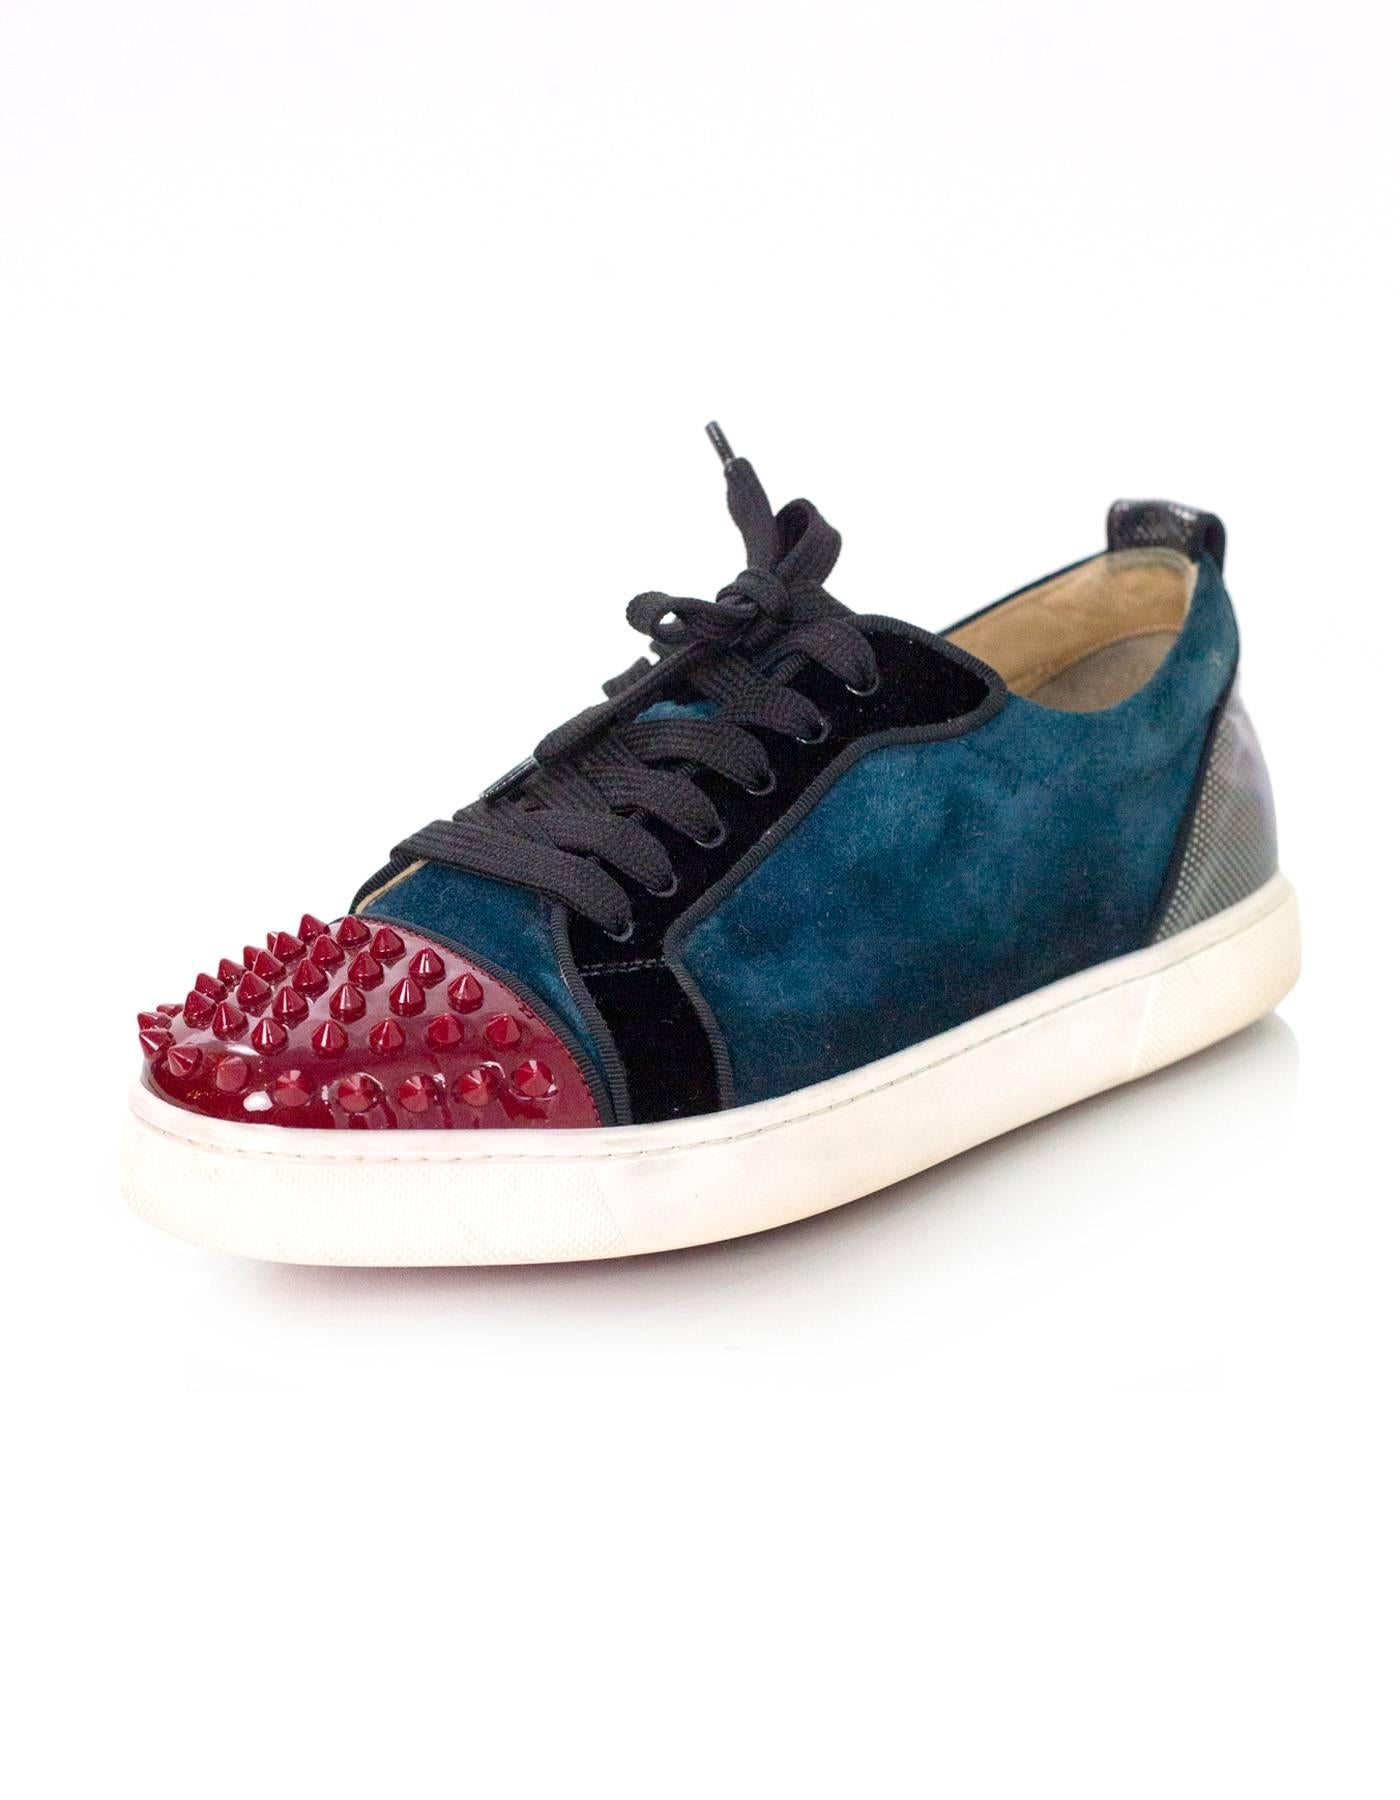 Christian Louboutin Teal & Red Louis Jr Sneakers Sz 40
Features studded cap toes and geometric print heels

Made In: Italy
Color: Teal, red, black
Materials: Velvet, patent leather
Closure/Opening: Lace tie closure
Sole Stamp: Christian